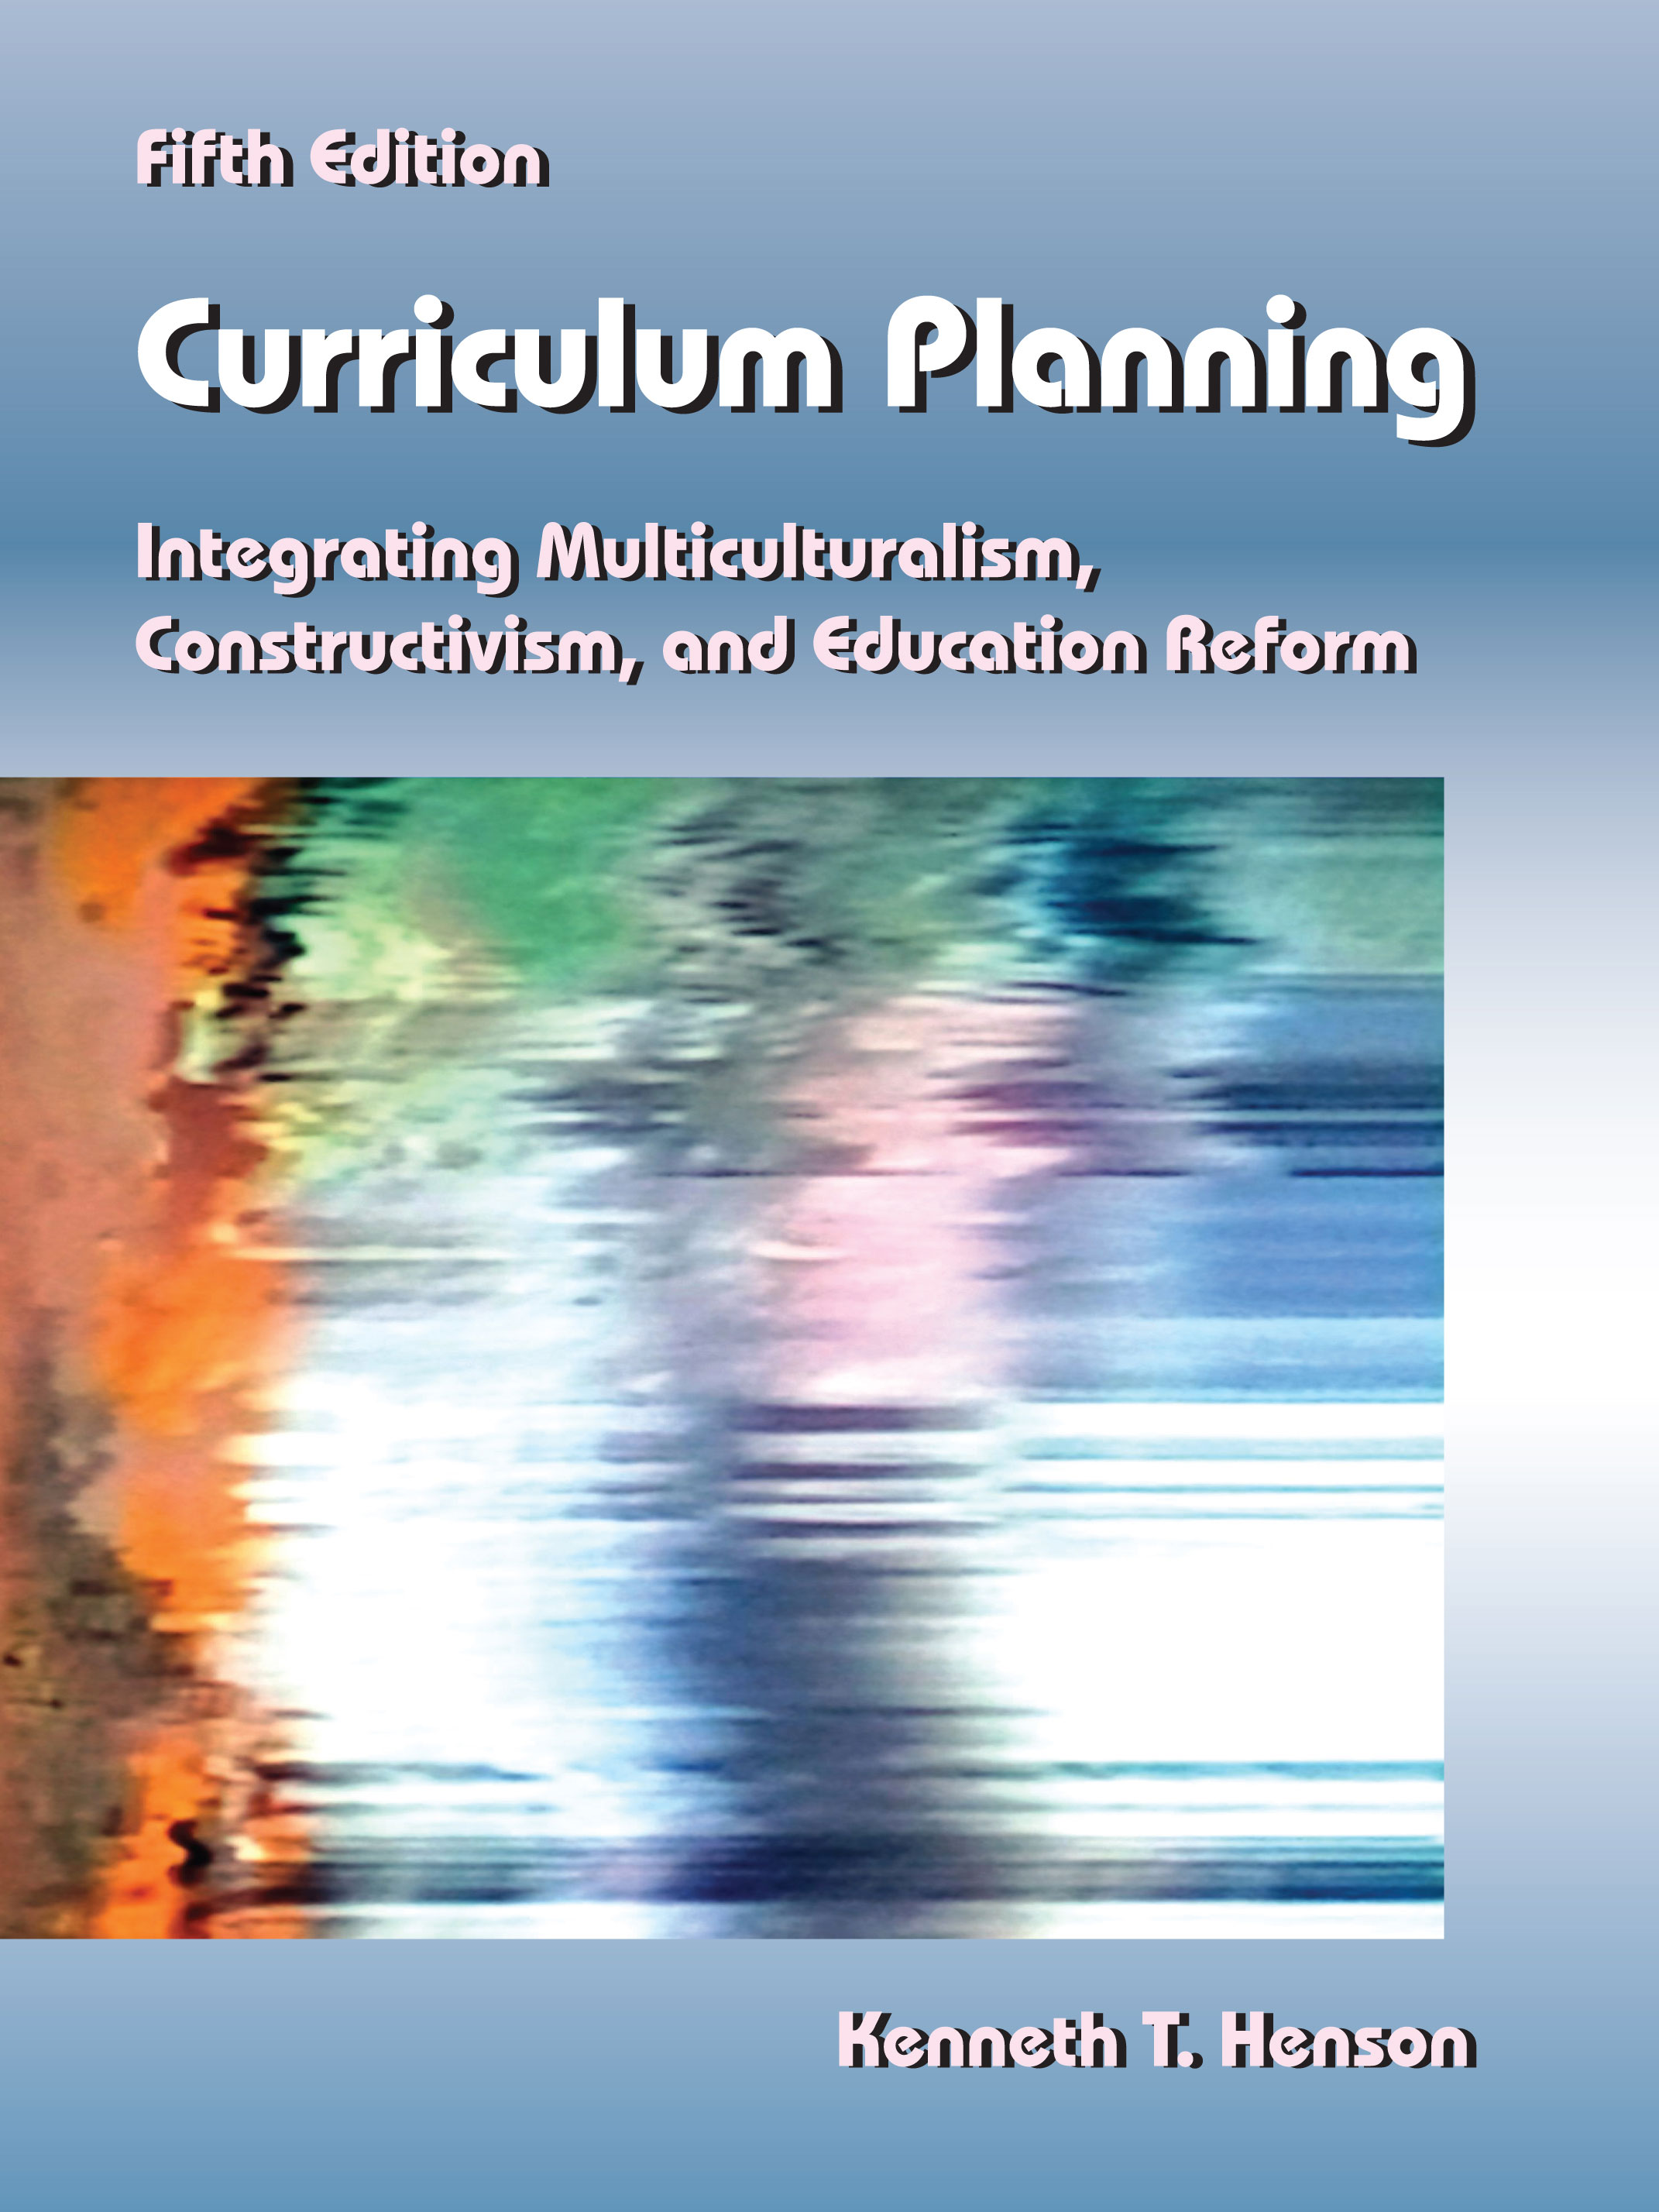 Curriculum Planning: Integrating Multiculturalism, Constructivism, and Education Reform, Fifth Edition by Kenneth T. Henson